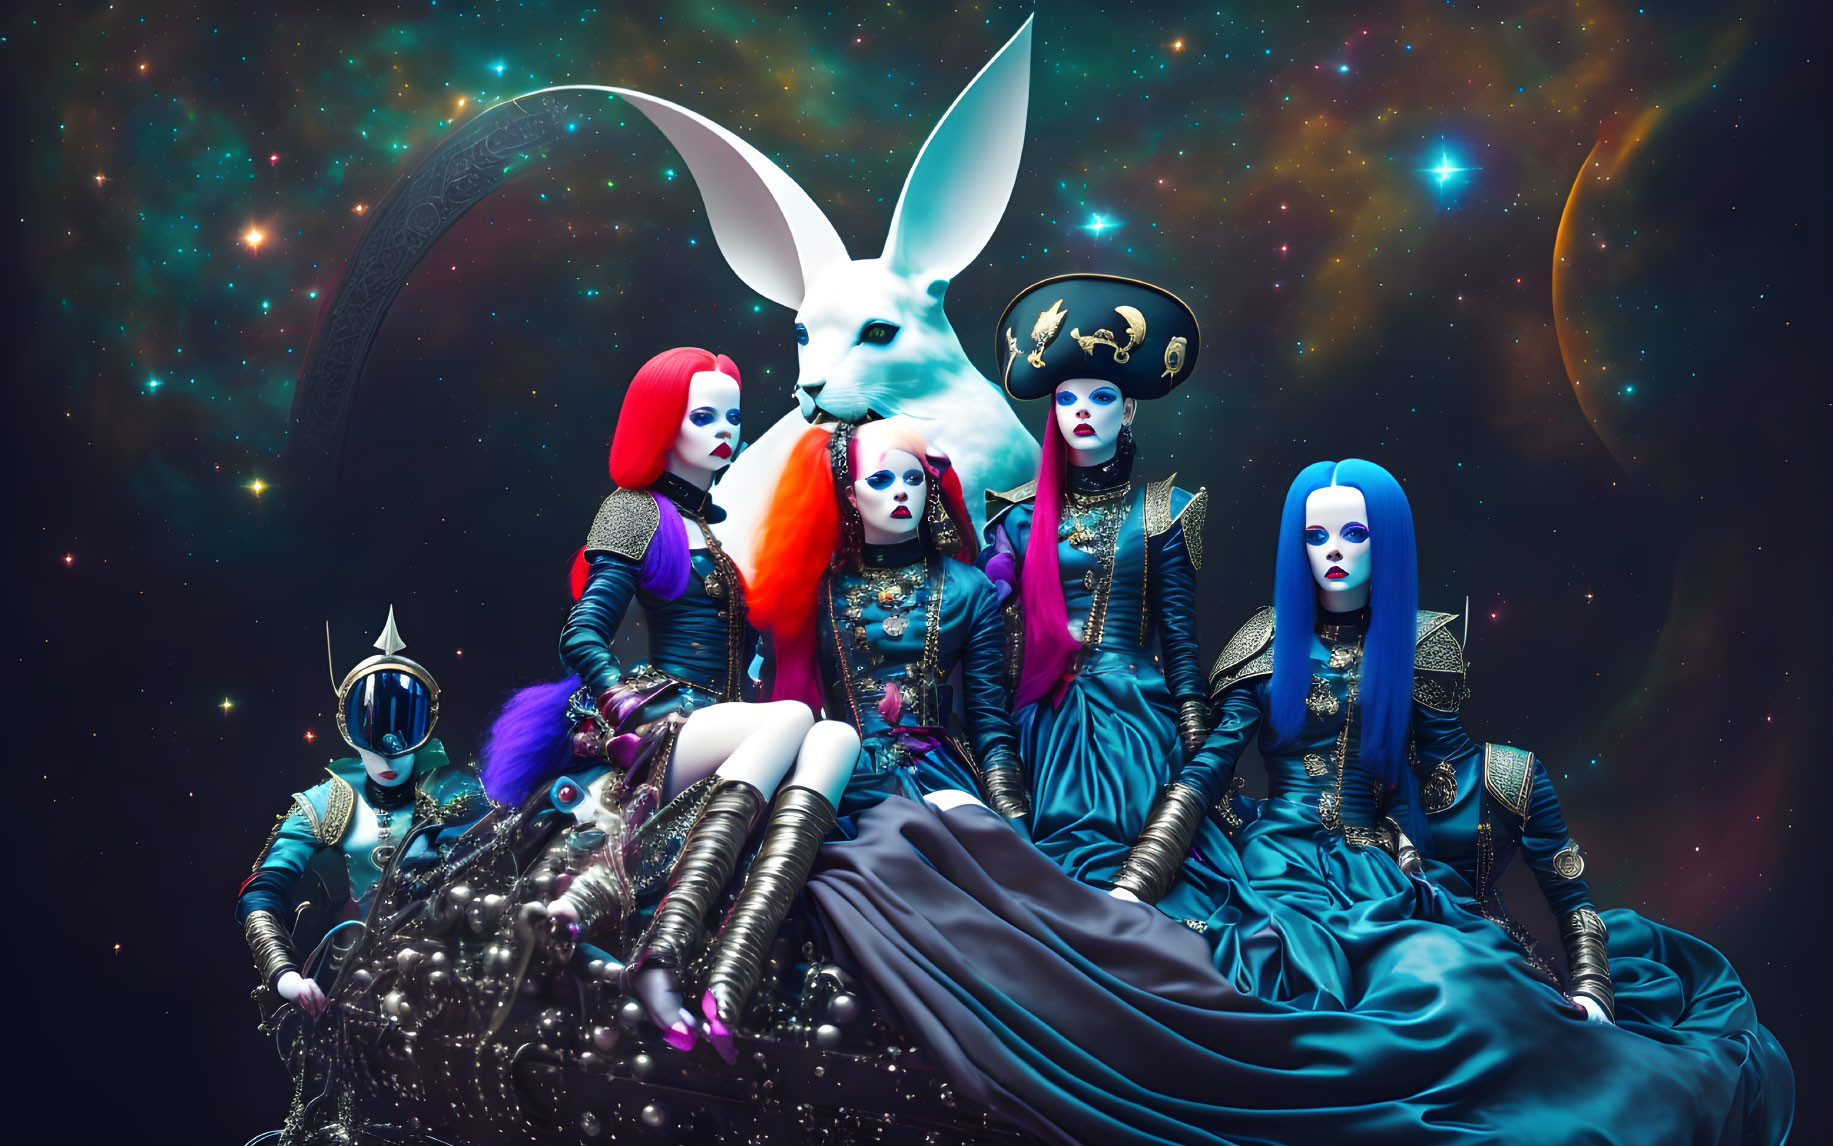 Four female figures in gothic attire with giant white rabbit in surreal cosmic scene